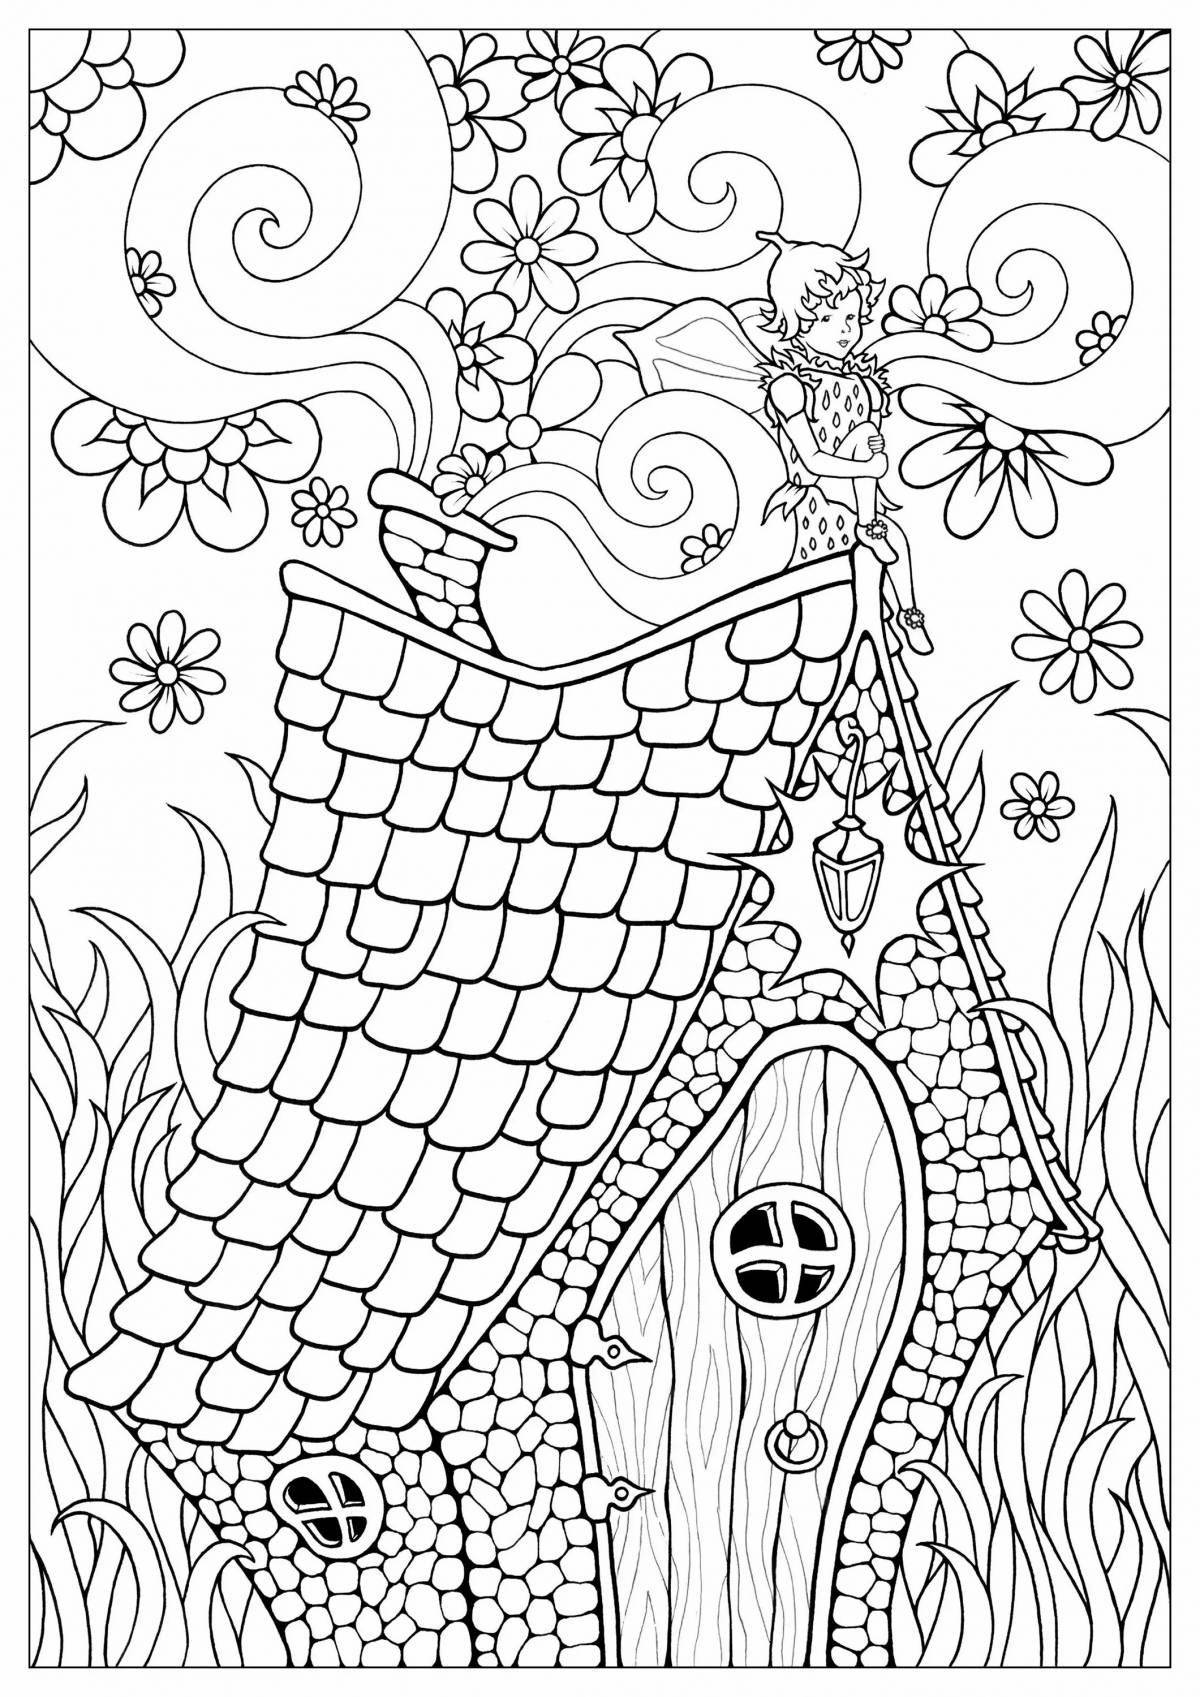 Exquisite fairy tale house coloring book